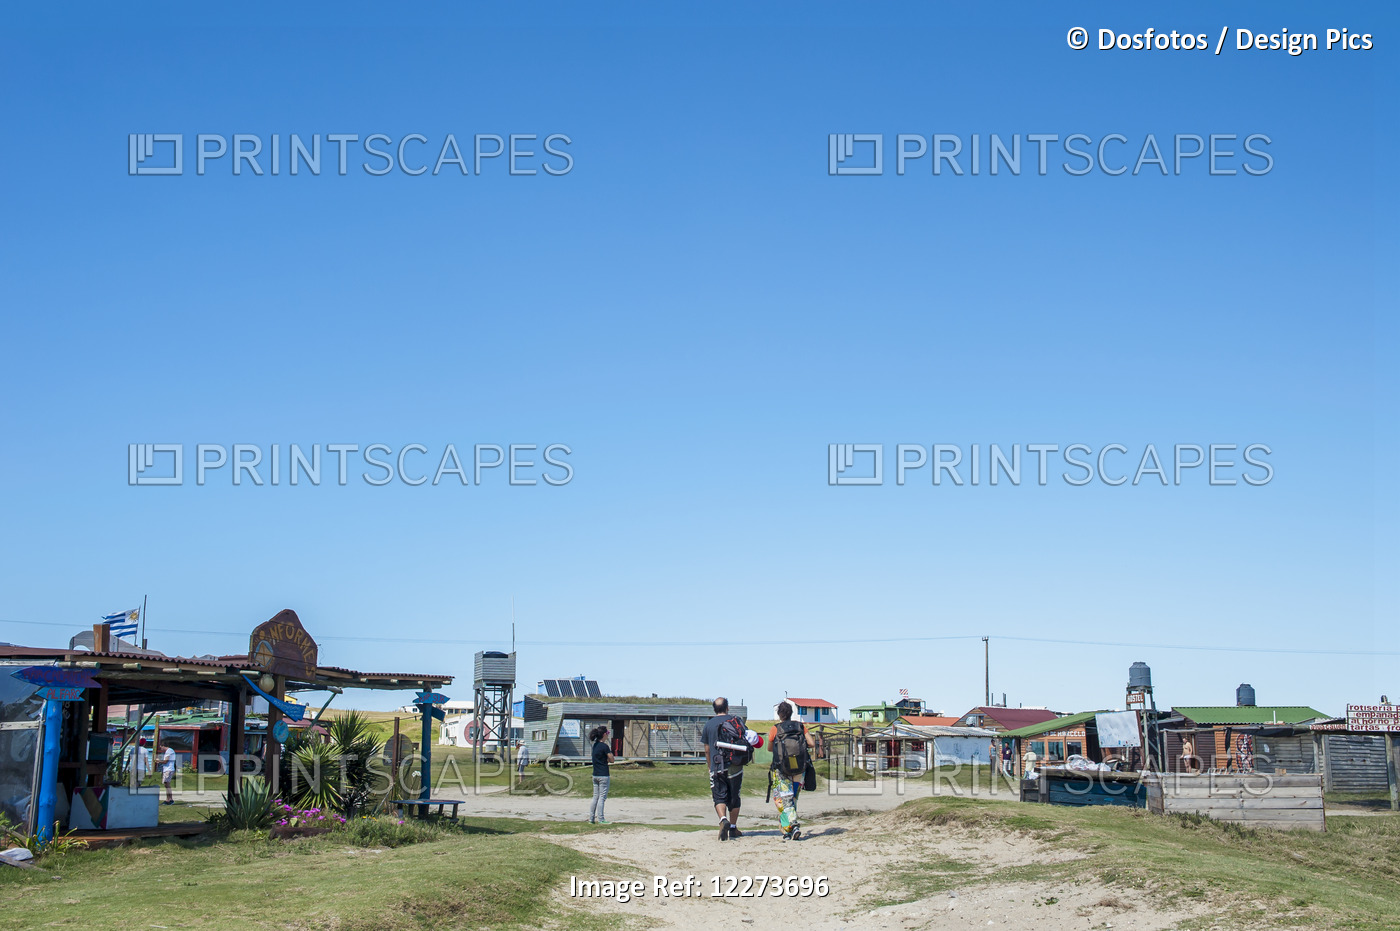 Pedestrians Walking On The Sandy Path By Buildings And Hostels On The Coast; ...